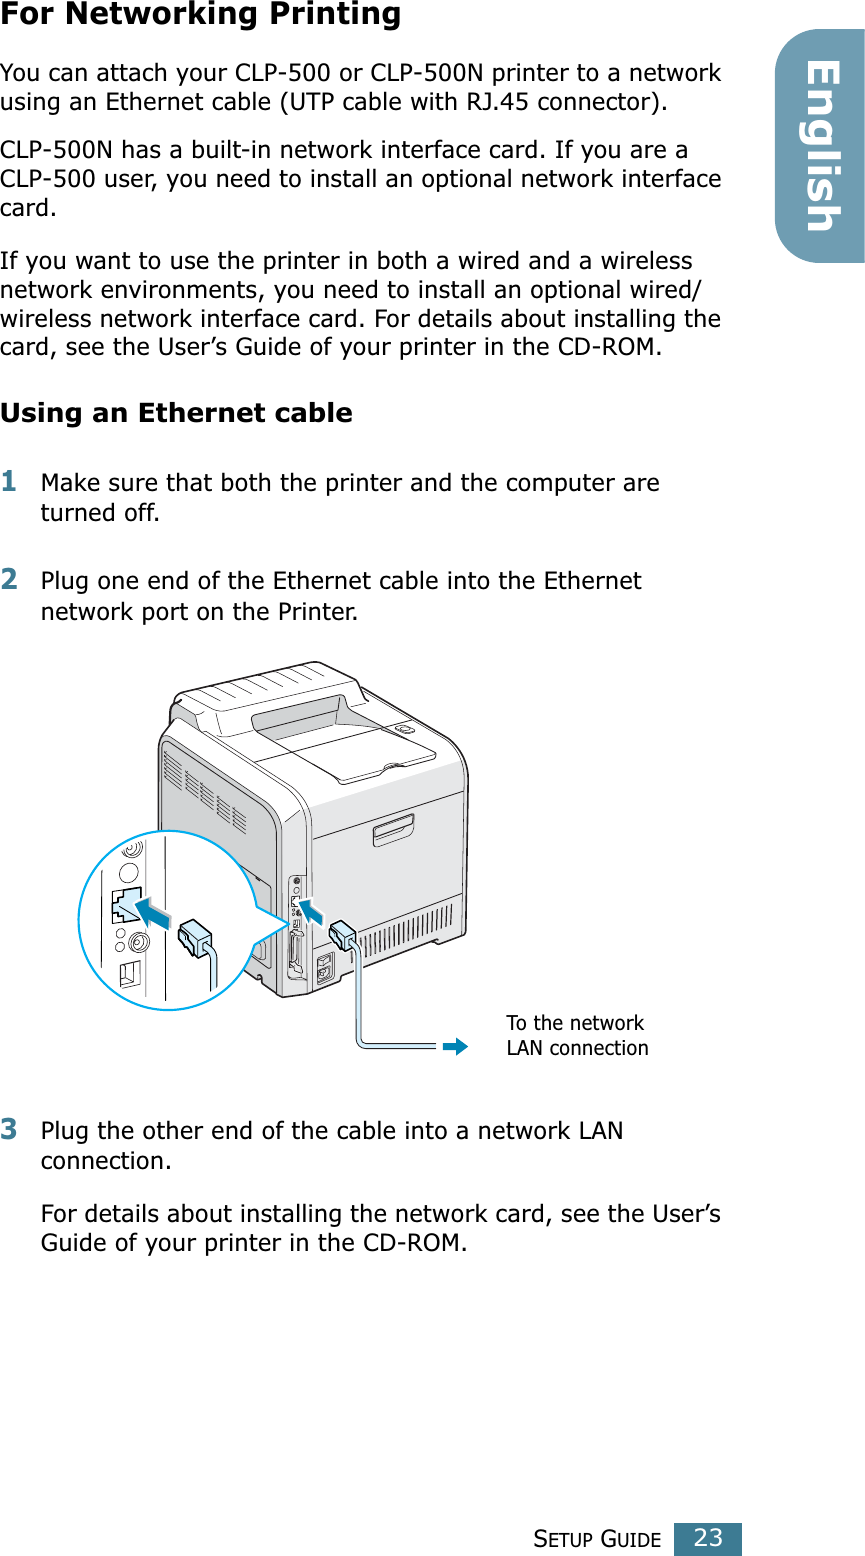 SETUP GUIDE23EnglishFor Networking Printing You can attach your CLP-500 or CLP-500N printer to a network using an Ethernet cable (UTP cable with RJ.45 connector). CLP-500N has a built-in network interface card. If you are a CLP-500 user, you need to install an optional network interface card. If you want to use the printer in both a wired and a wireless network environments, you need to install an optional wired/wireless network interface card. For details about installing the card, see the User’s Guide of your printer in the CD-ROM.Using an Ethernet cable1Make sure that both the printer and the computer are turned off.2Plug one end of the Ethernet cable into the Ethernet network port on the Printer.3Plug the other end of the cable into a network LAN connection.For details about installing the network card, see the User’s Guide of your printer in the CD-ROM.To the network LAN connection